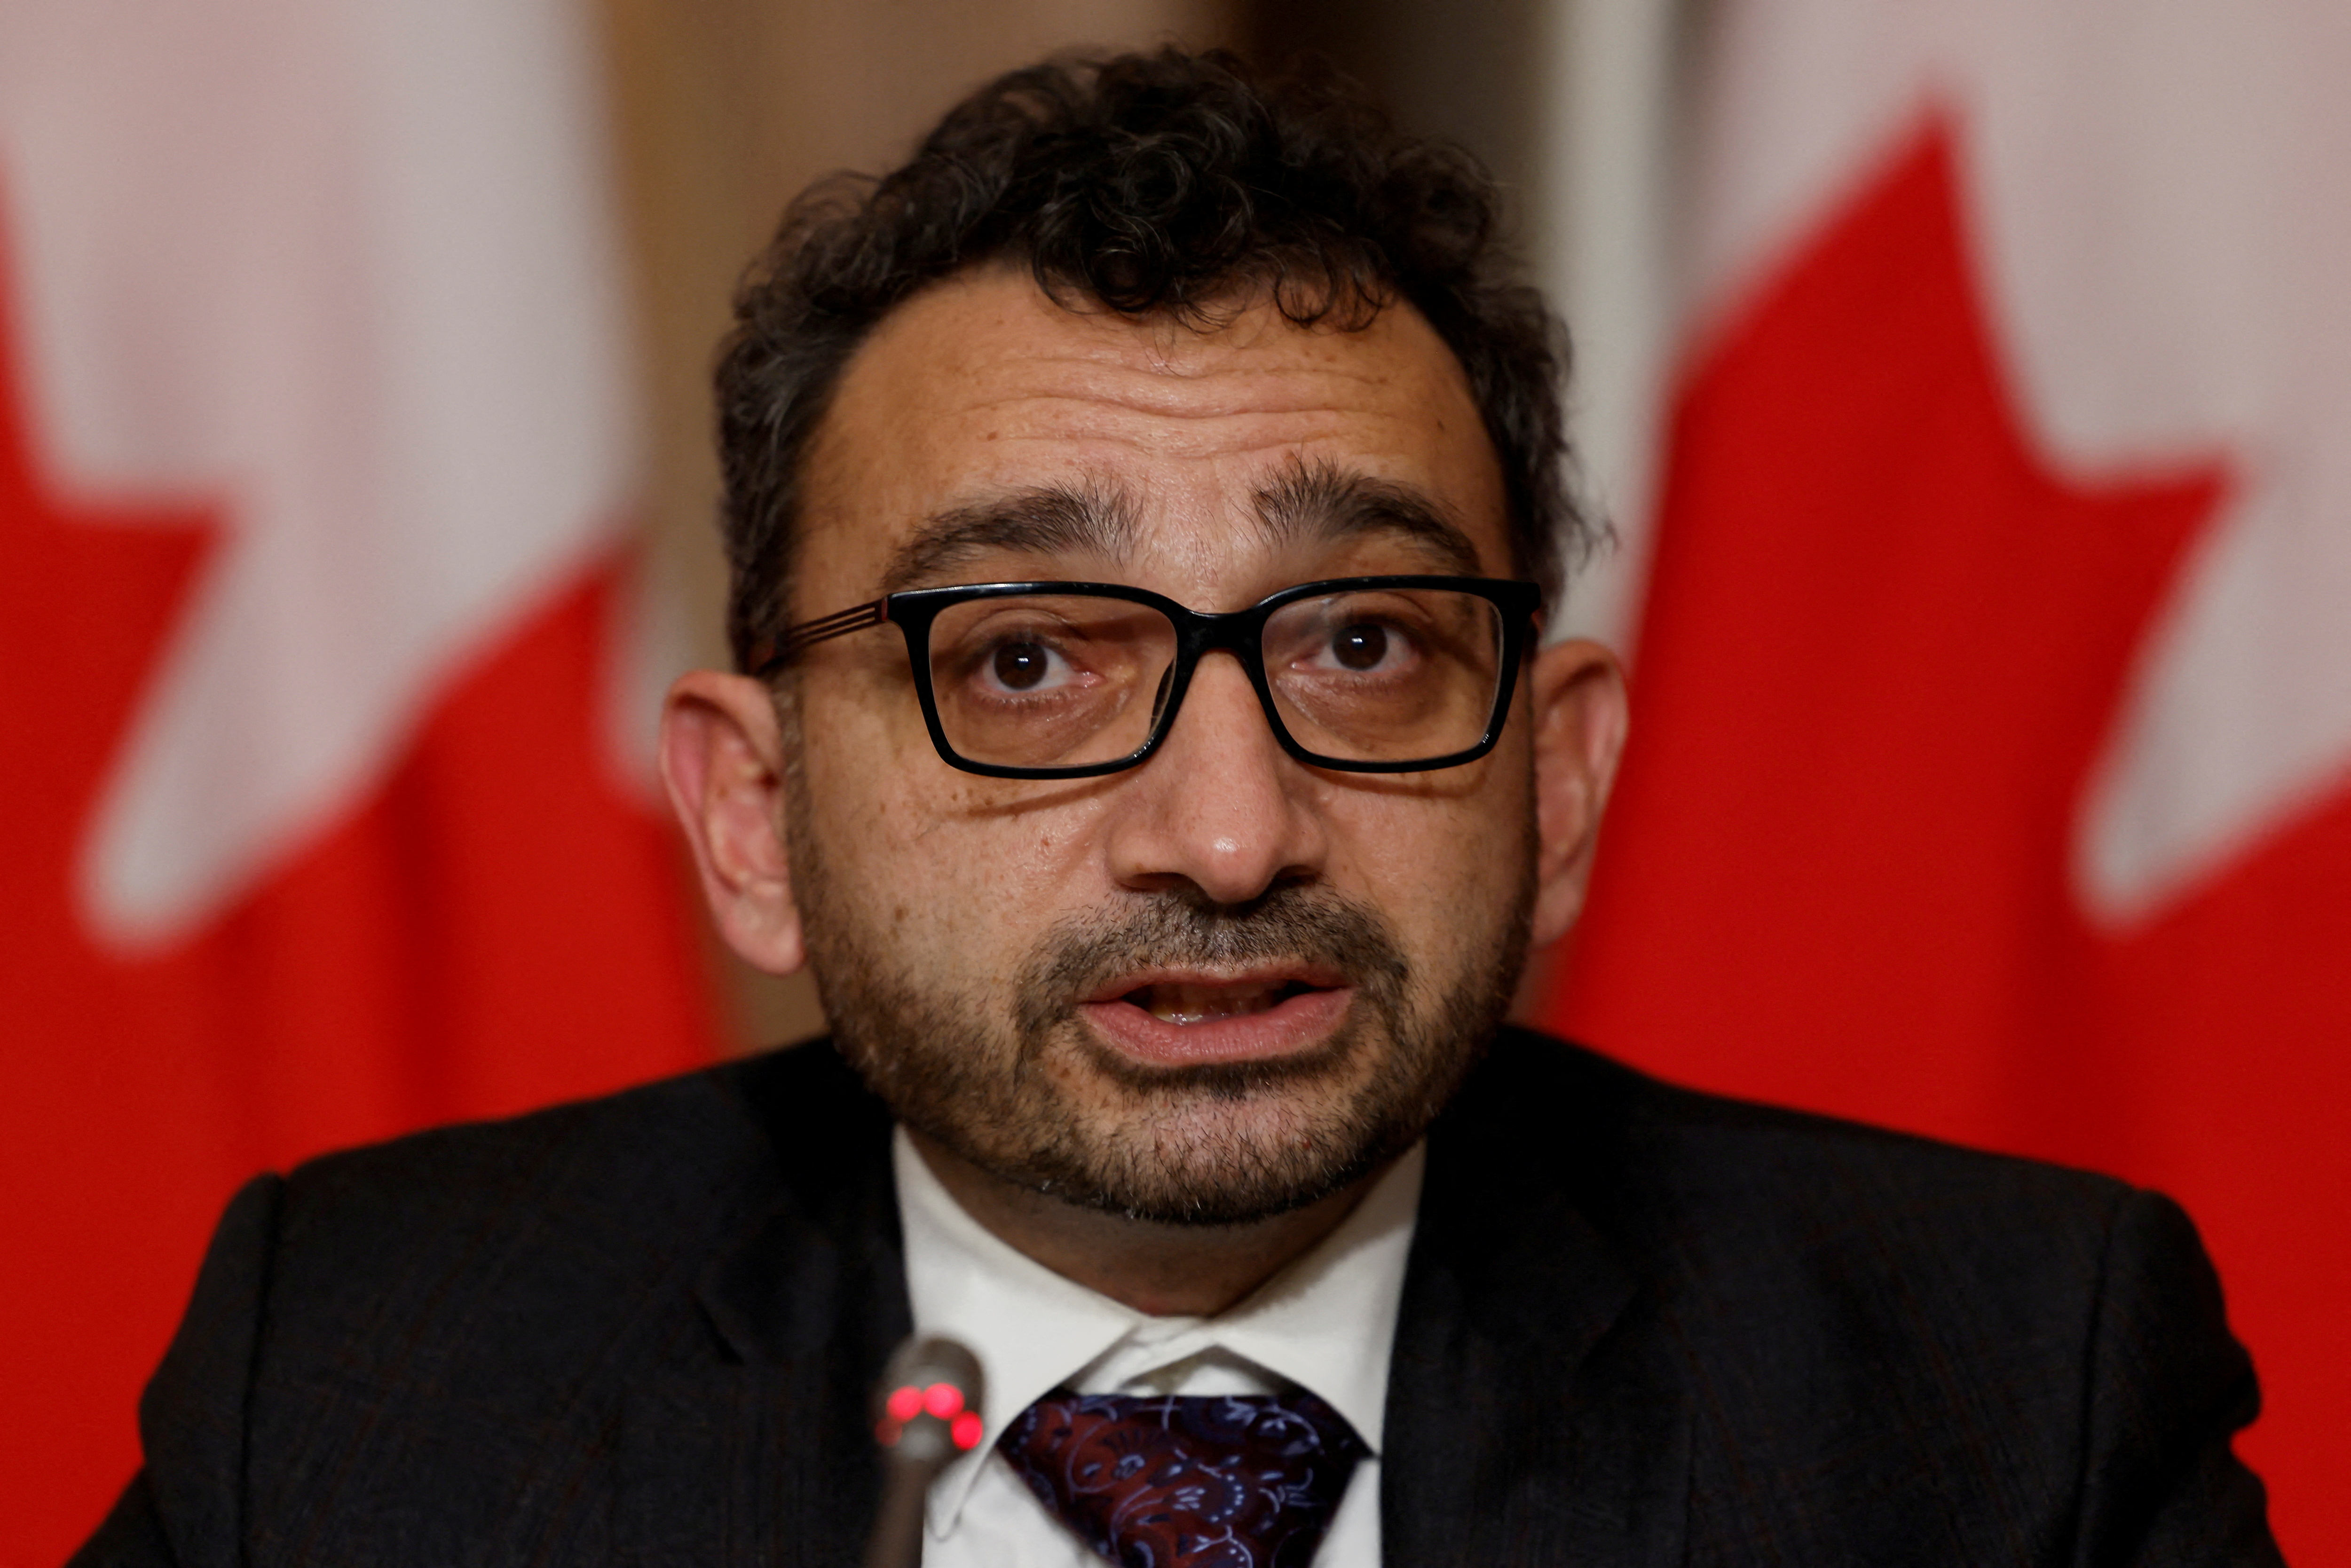 Canada's Minister of Transport Omar Alghabra takes part in a press conference in Ottawa, Ontario, Canada November 30, 2021. REUTERS/Blair Gable/File Photo